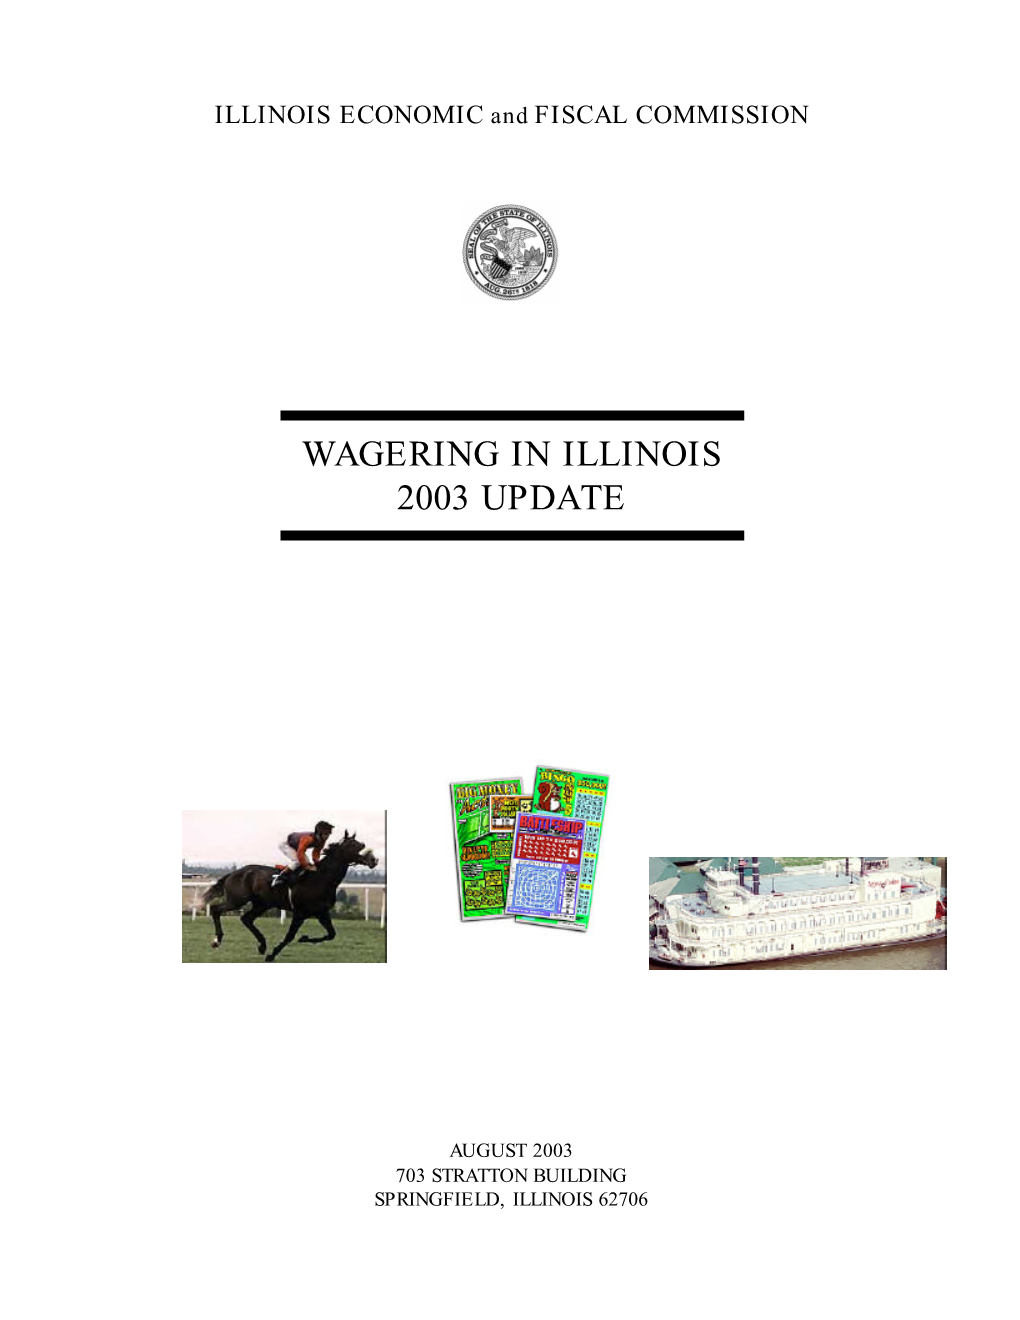 2003 Wagering in Illinois